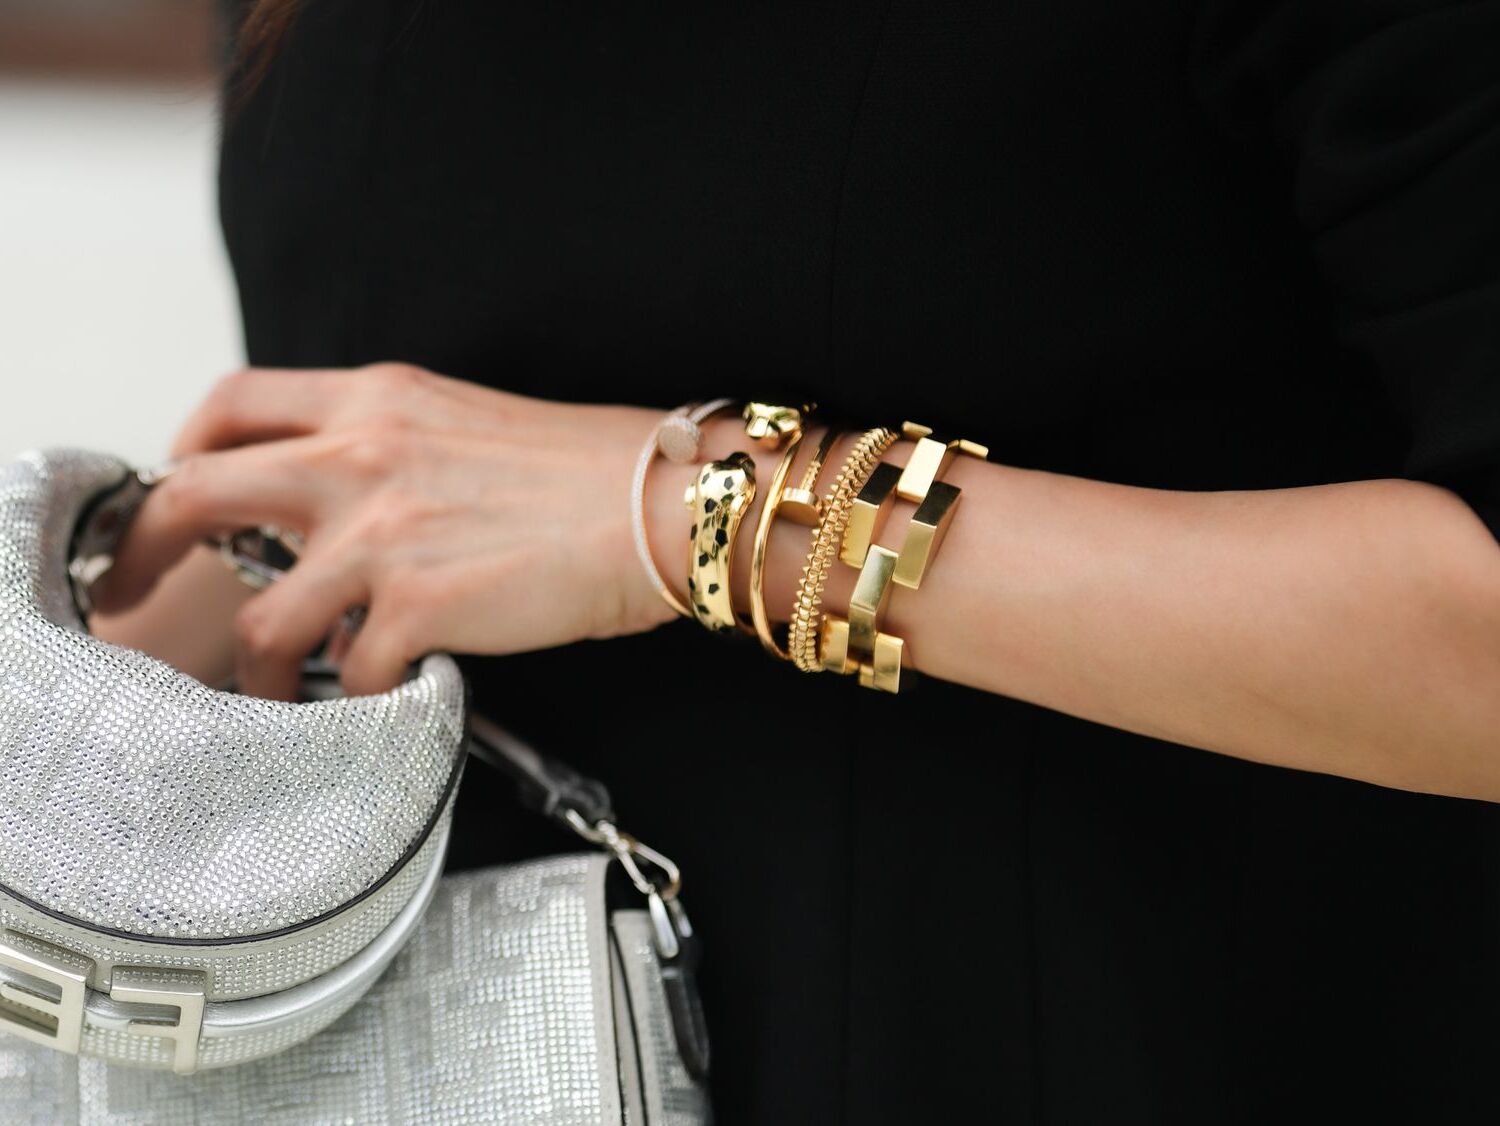 Stunning Bracelet Review: A Must-Have Accessory for Her